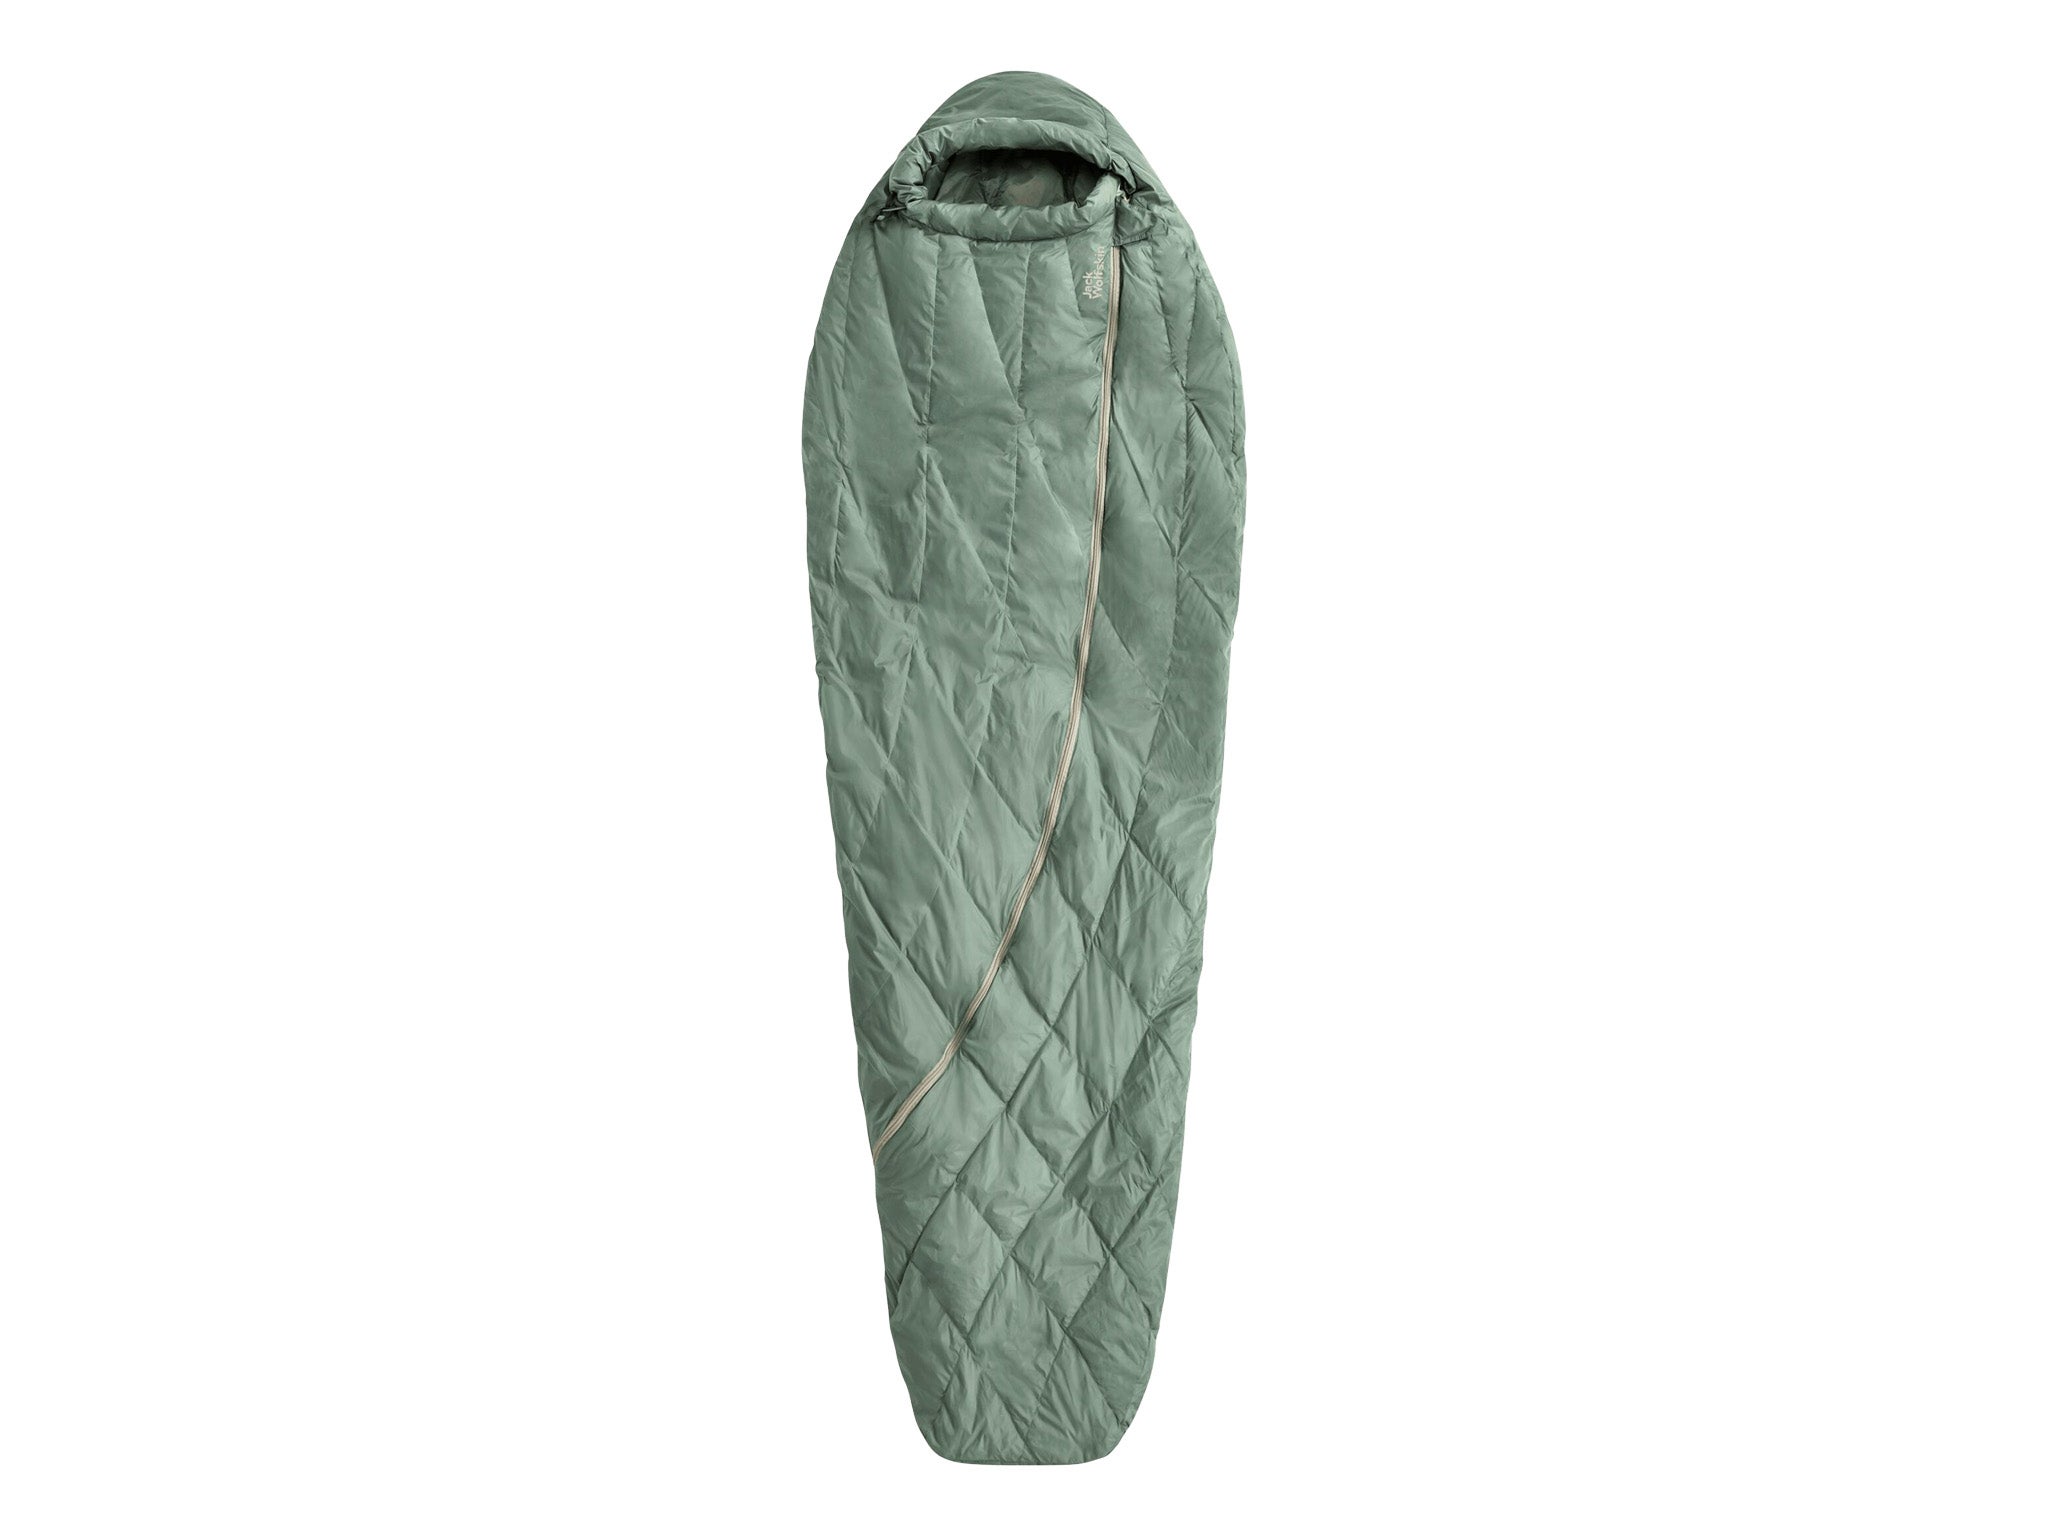 Ohuhu Sleeping Bag Lightweight Portable Backpacking Sleeping Bags with a  Compression Sack for Summer Camping and Hiking, 1.7 lb